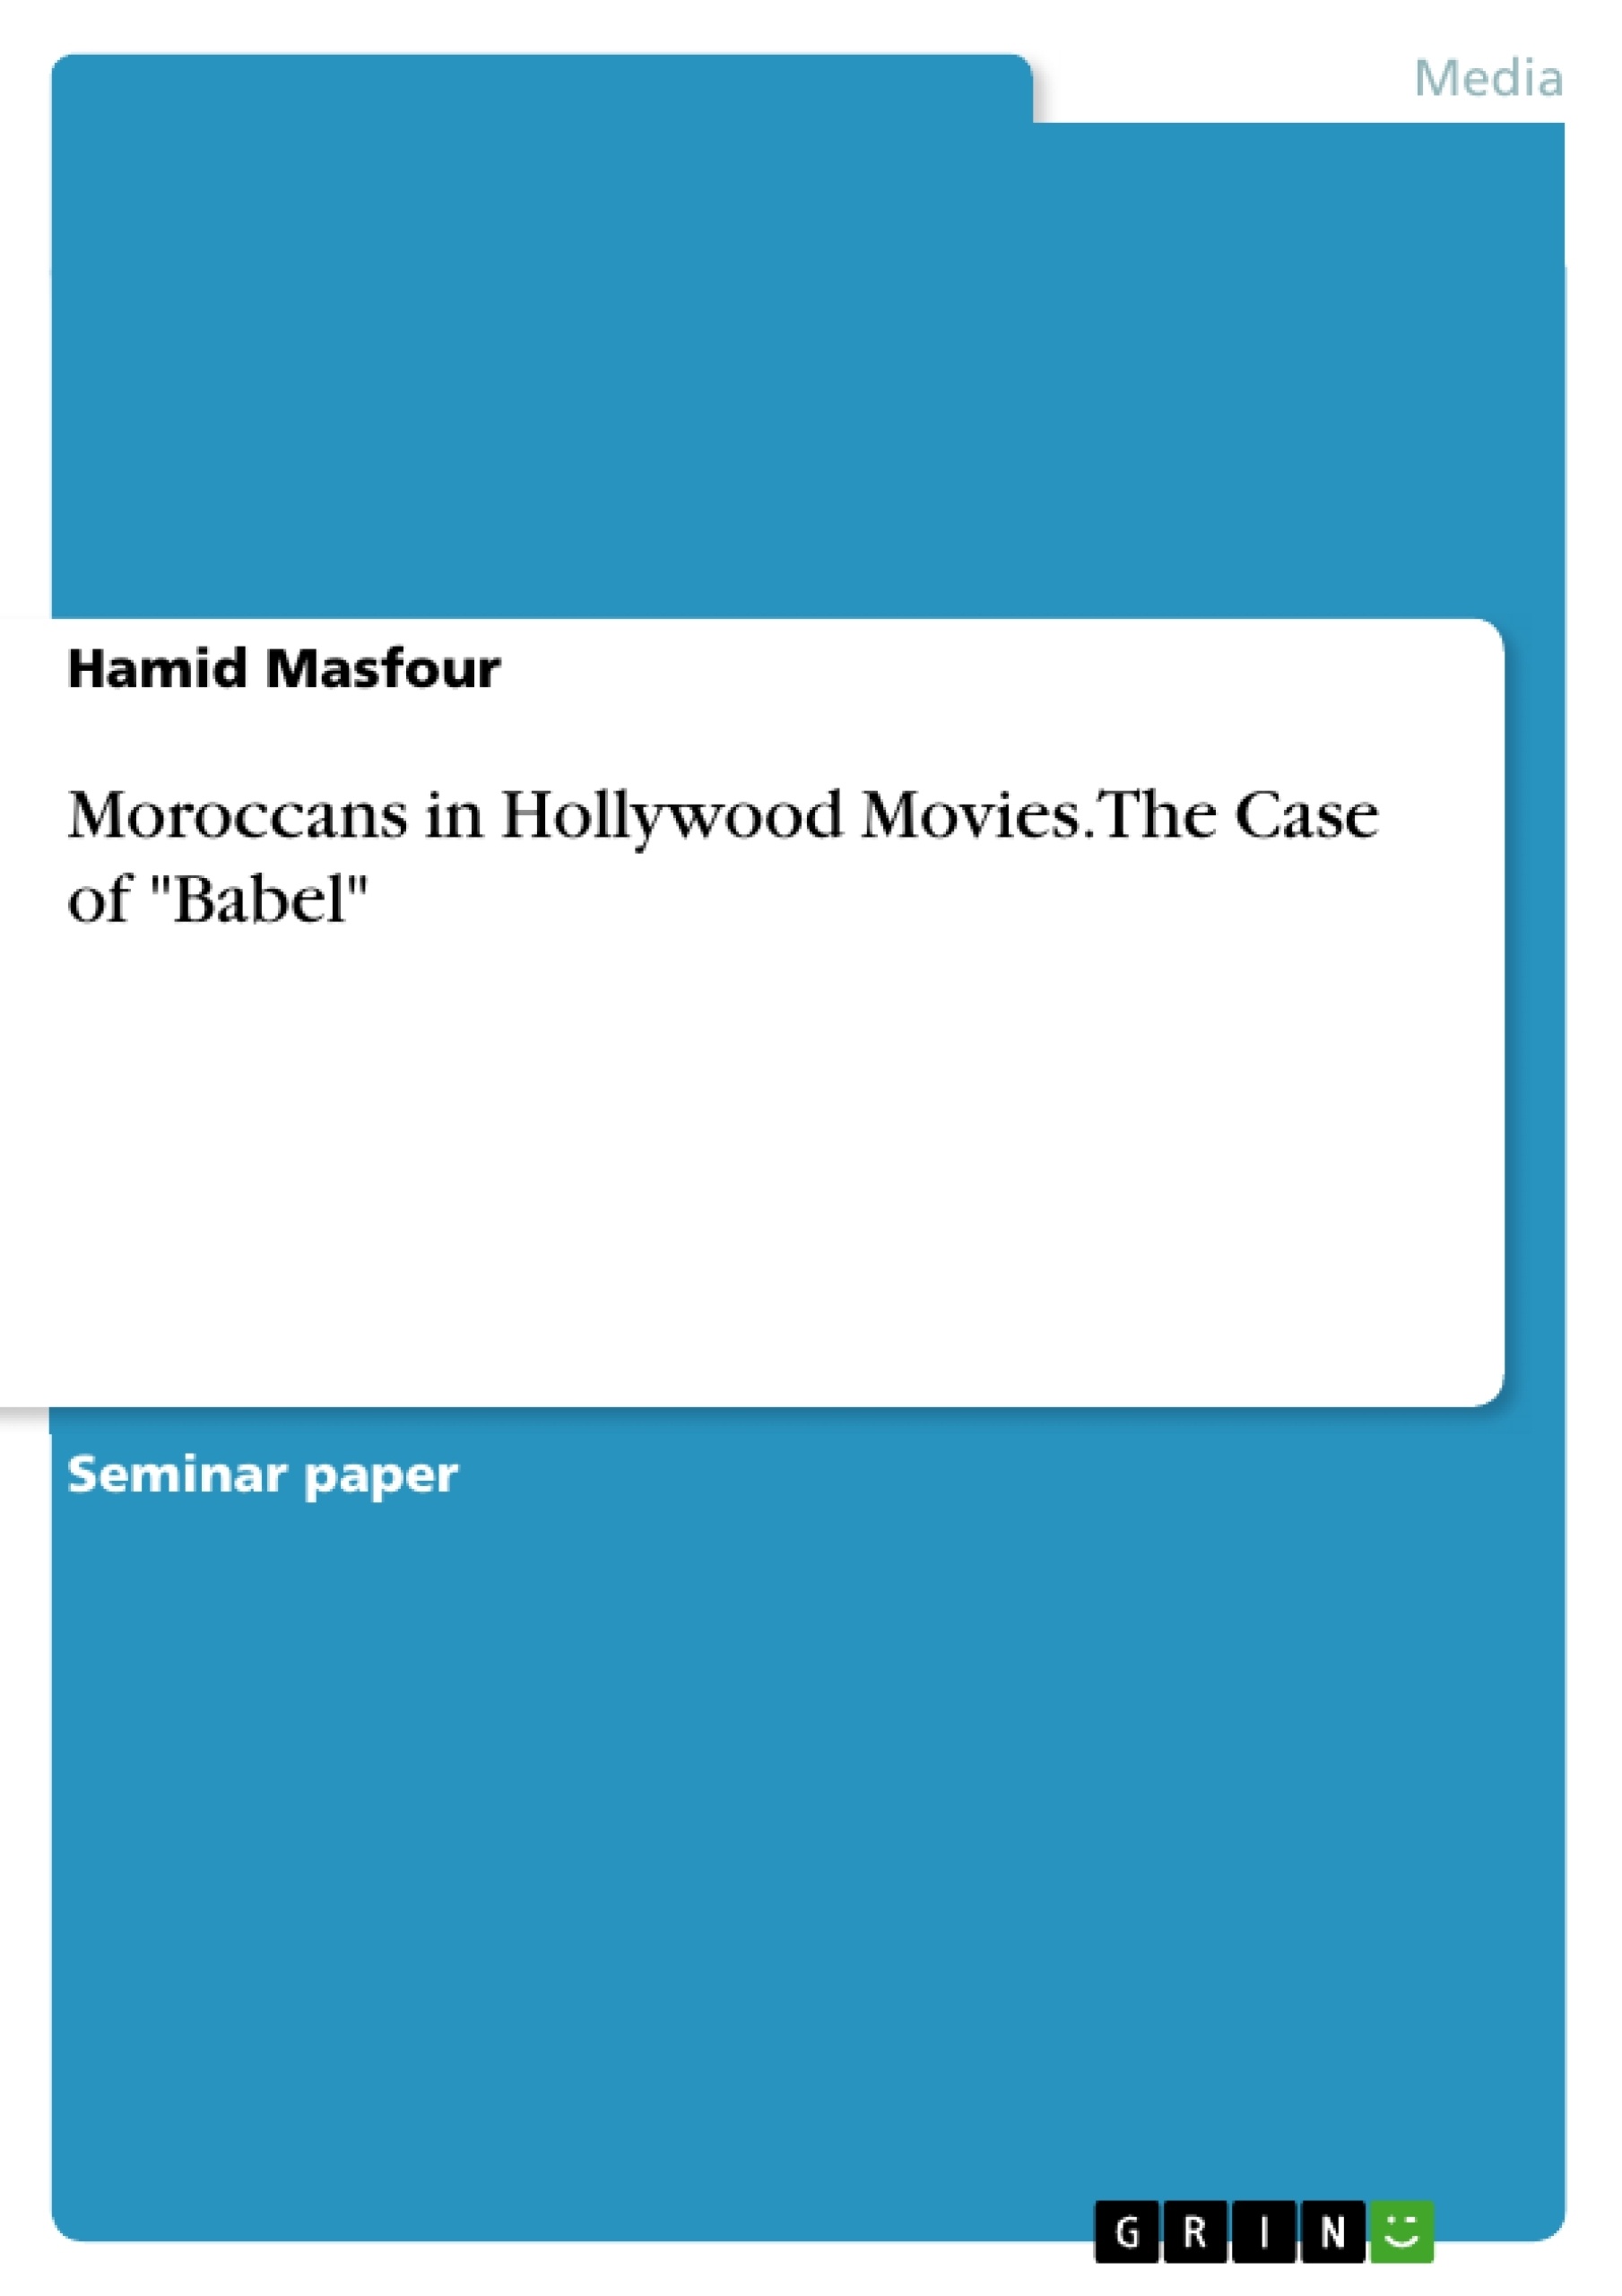 Titre: Moroccans in Hollywood Movies. The Case of "Babel"